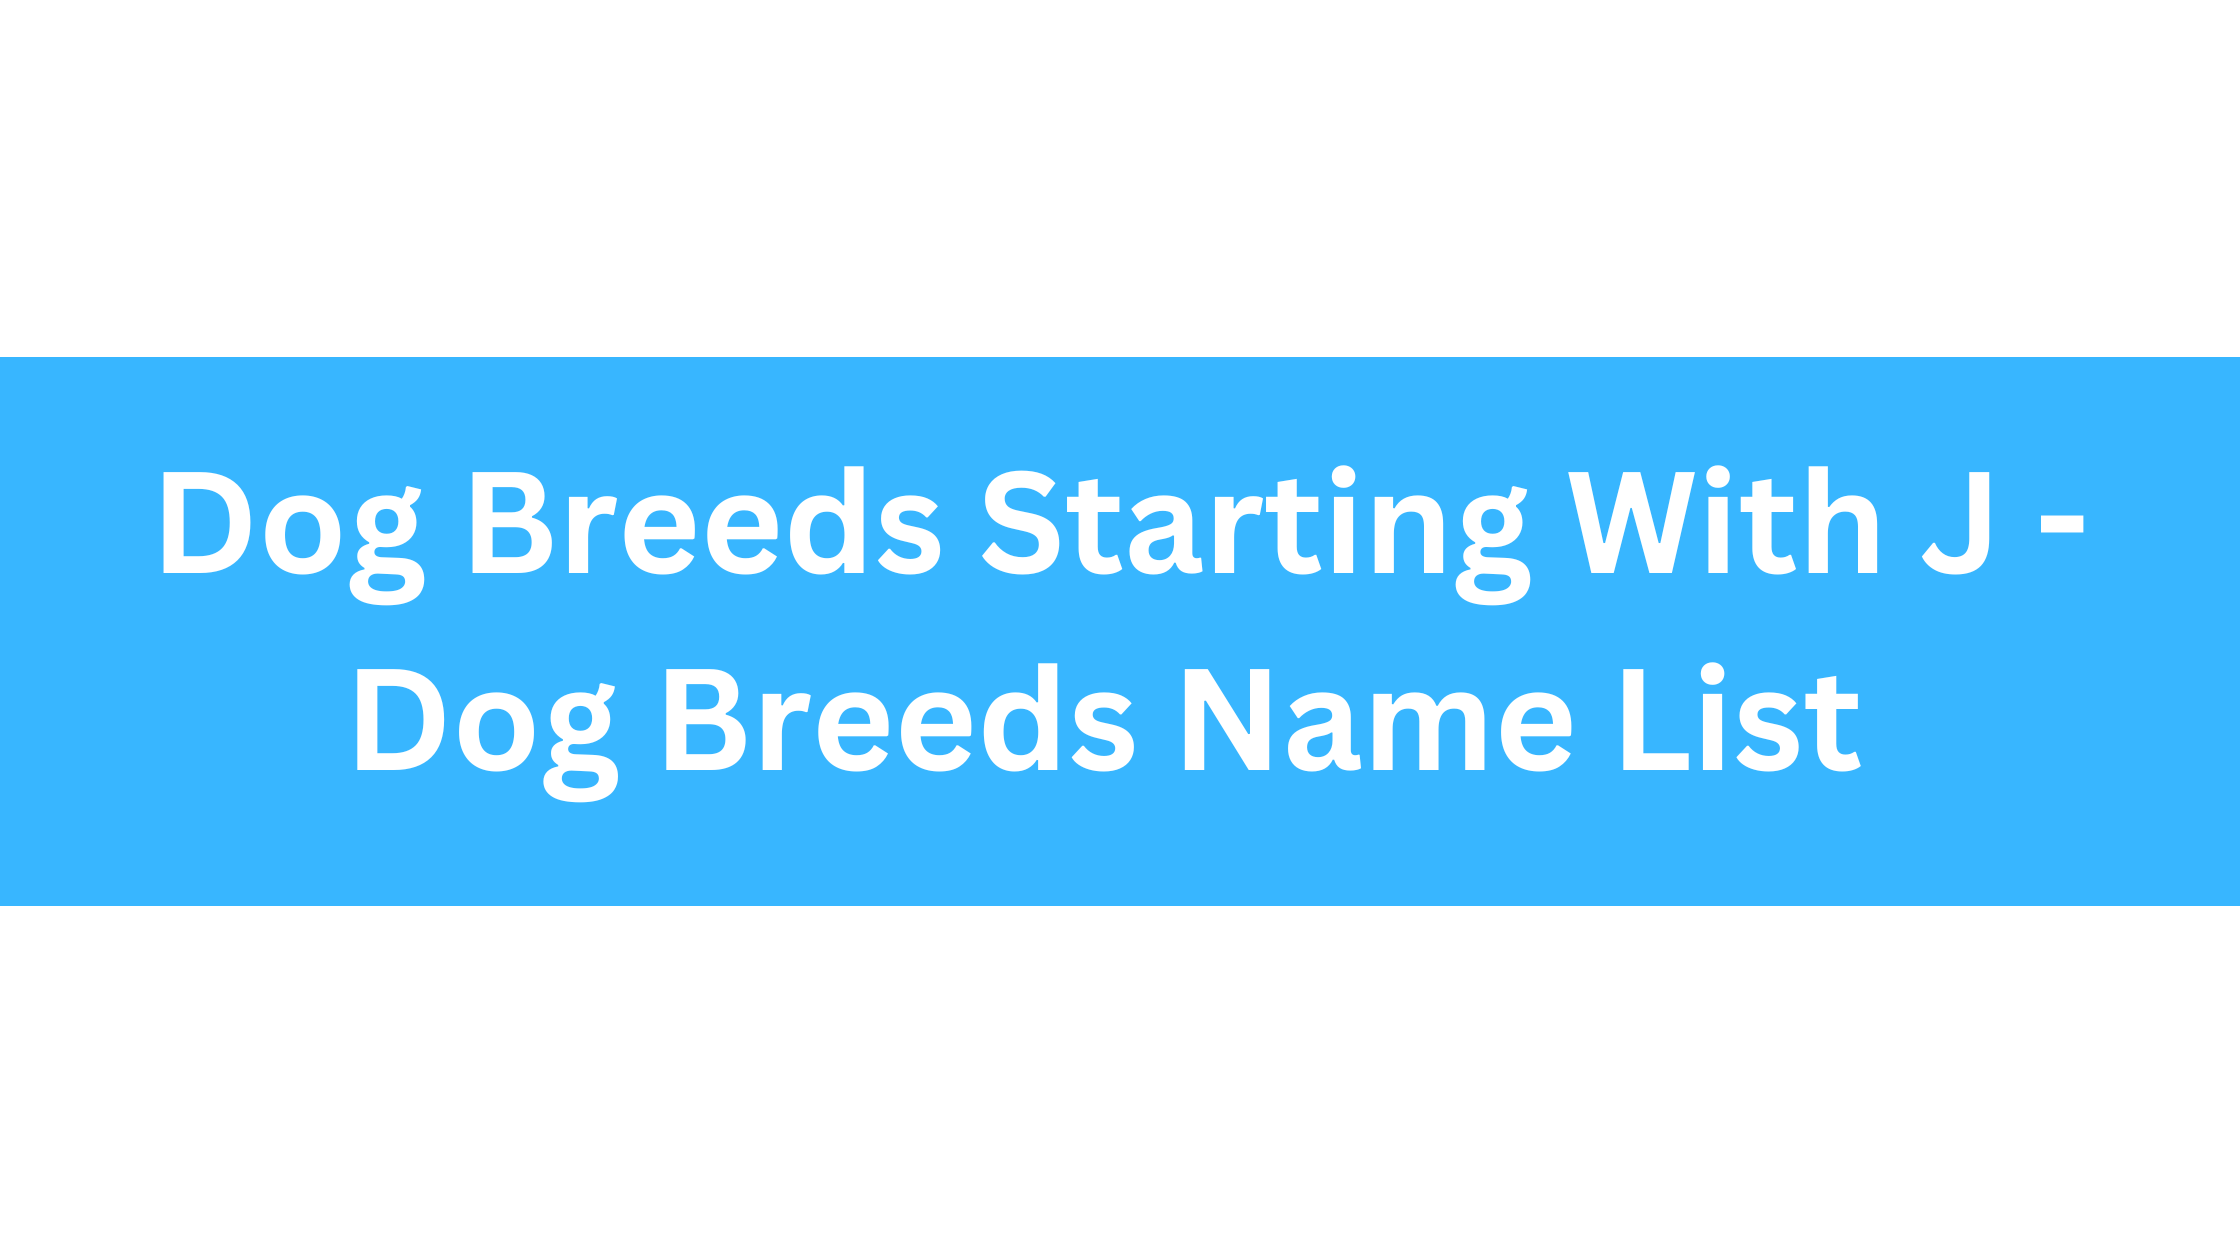 Dog Breeds Starting With J